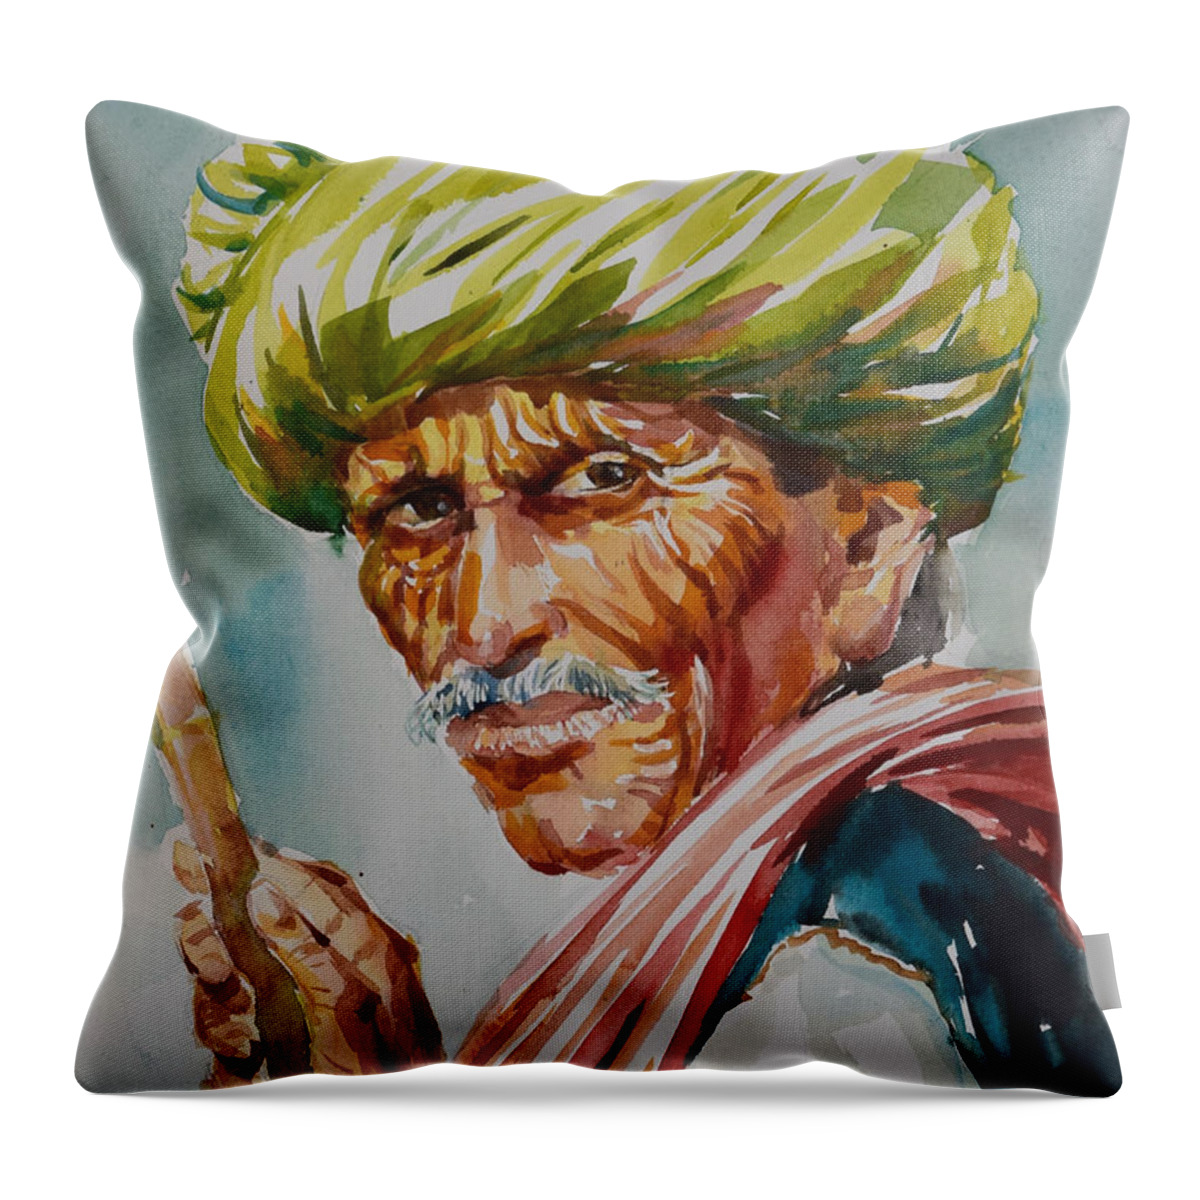  Throw Pillow featuring the painting Green Turban by Jyotika Shroff